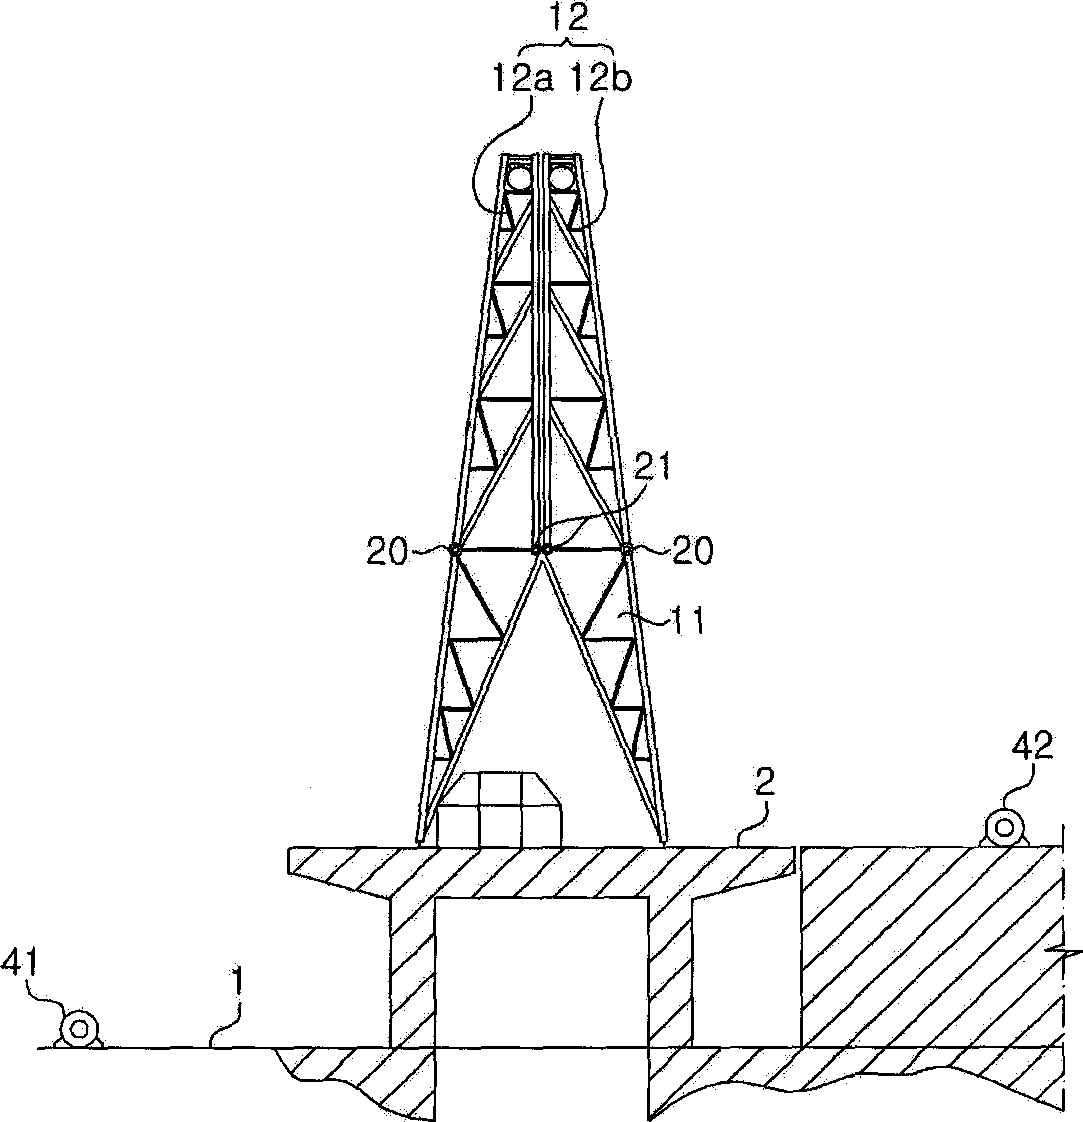 Foldable derrick structure for a ship